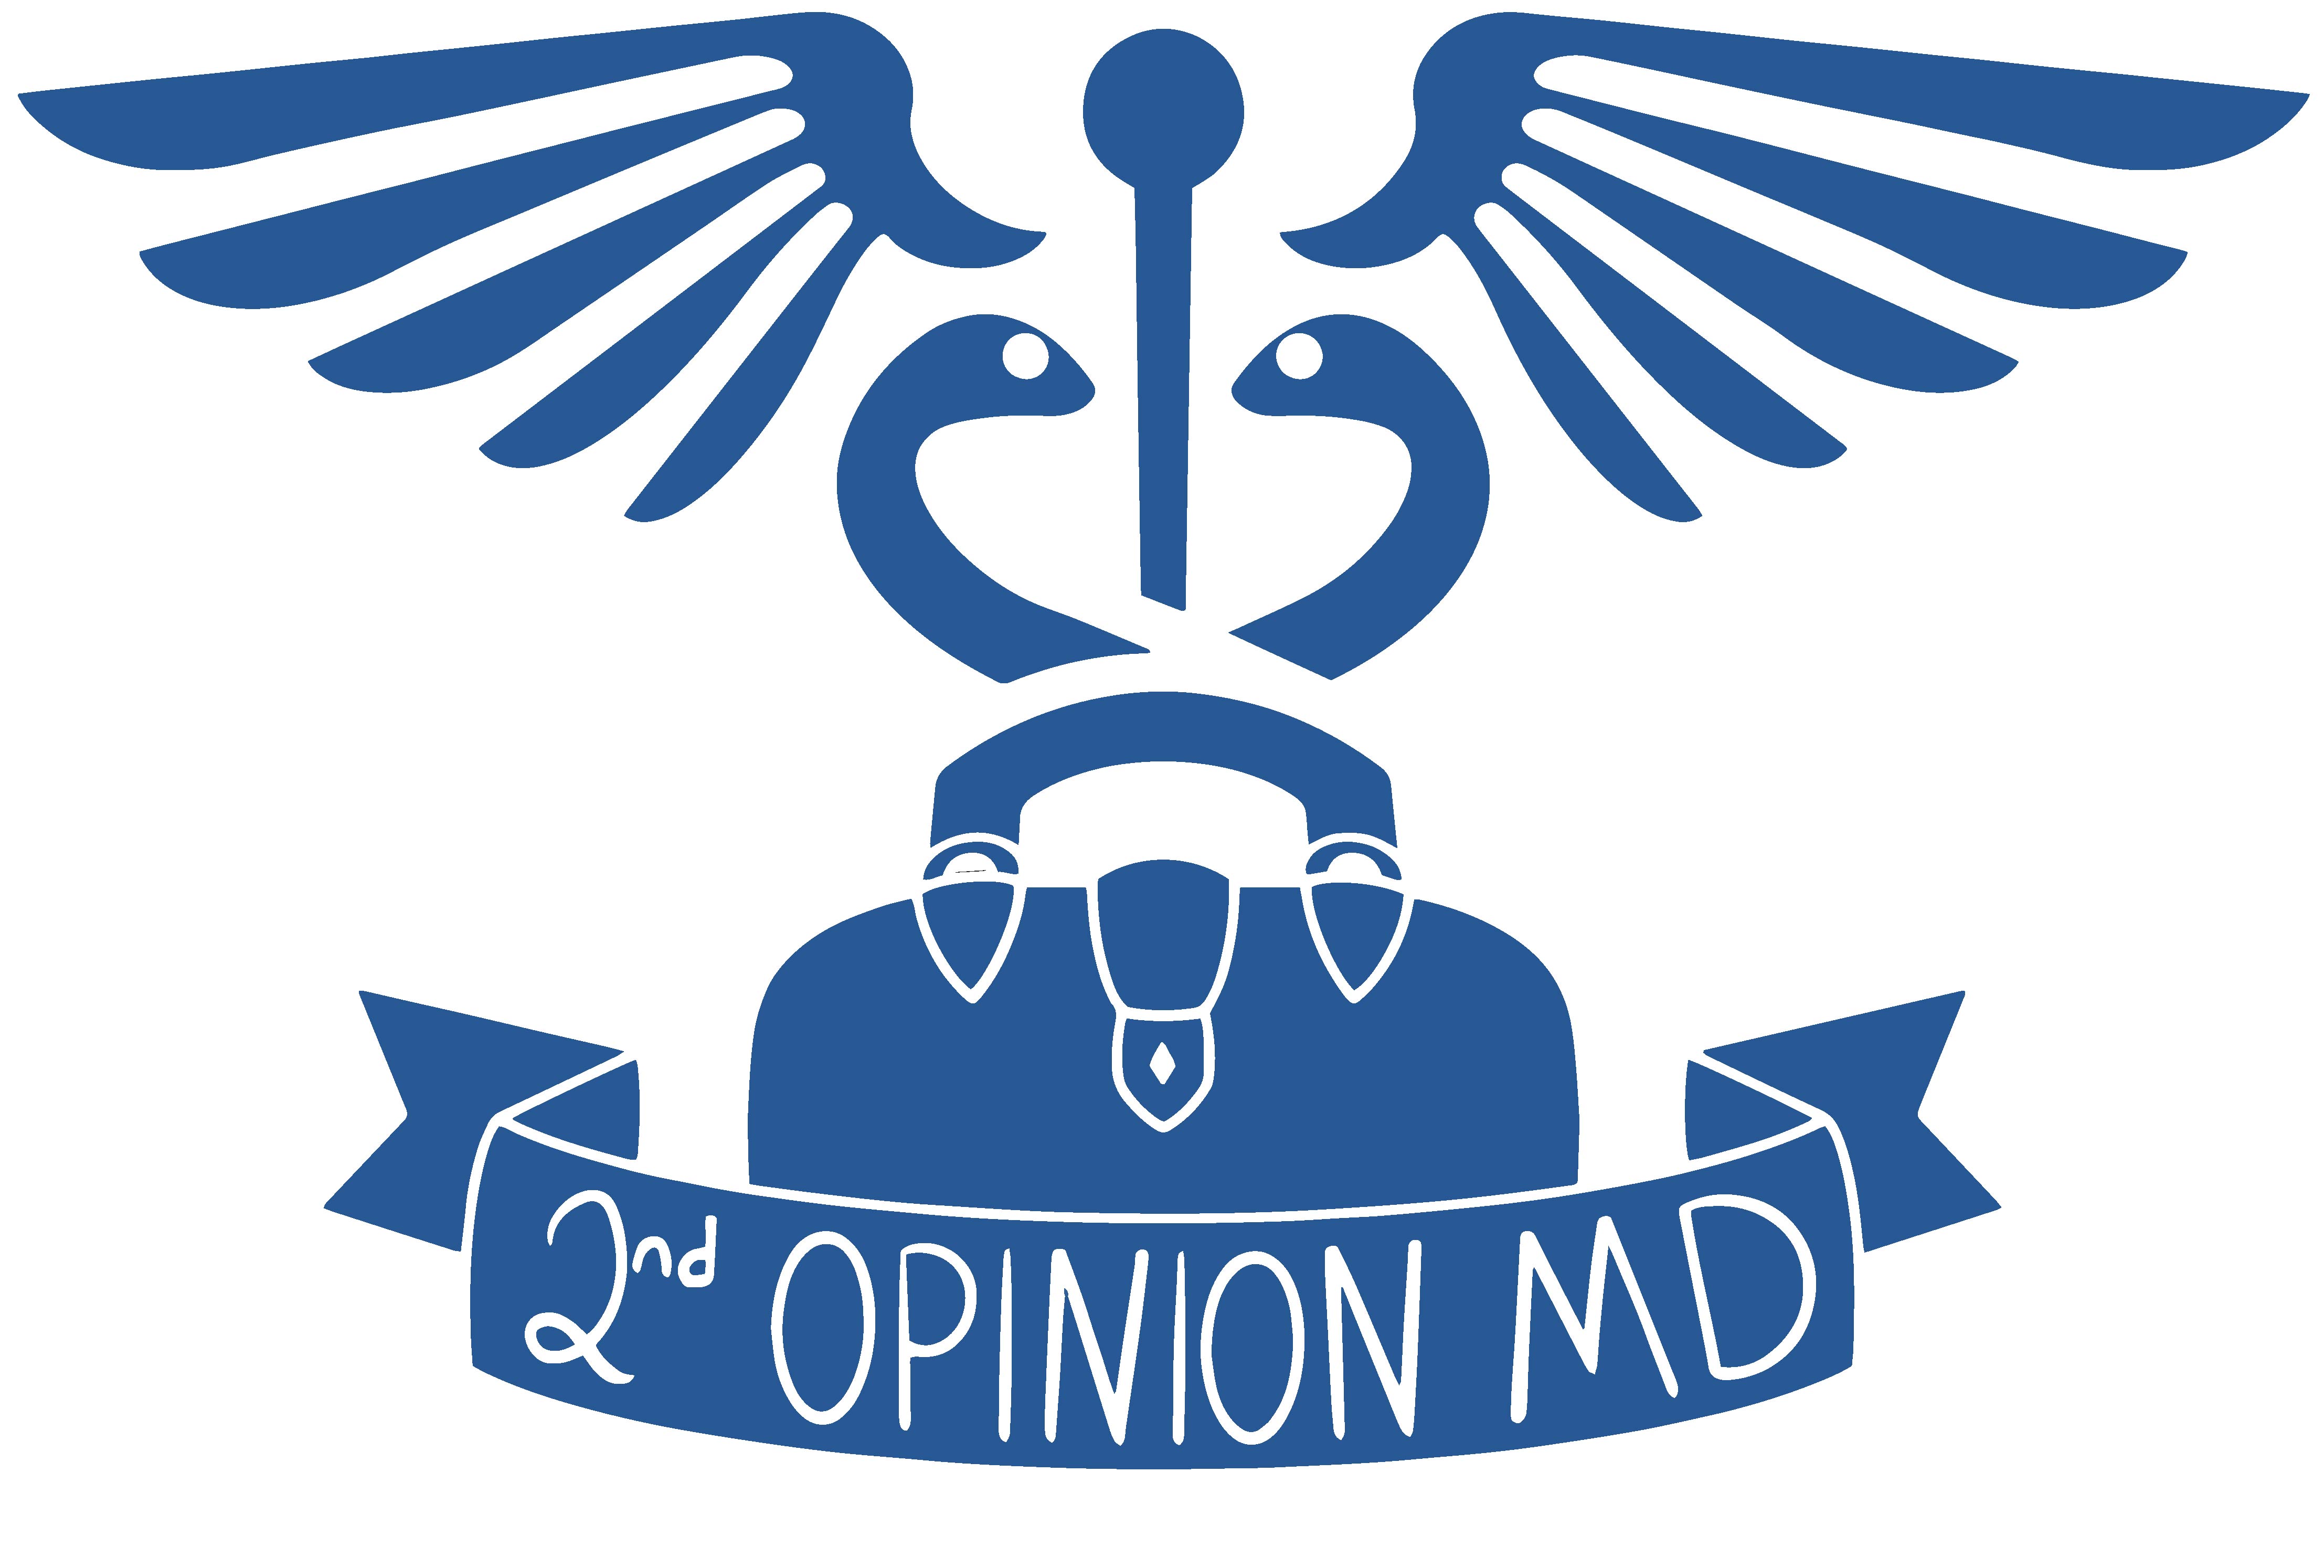 2nd Opinion MD Logo. Blue and white.